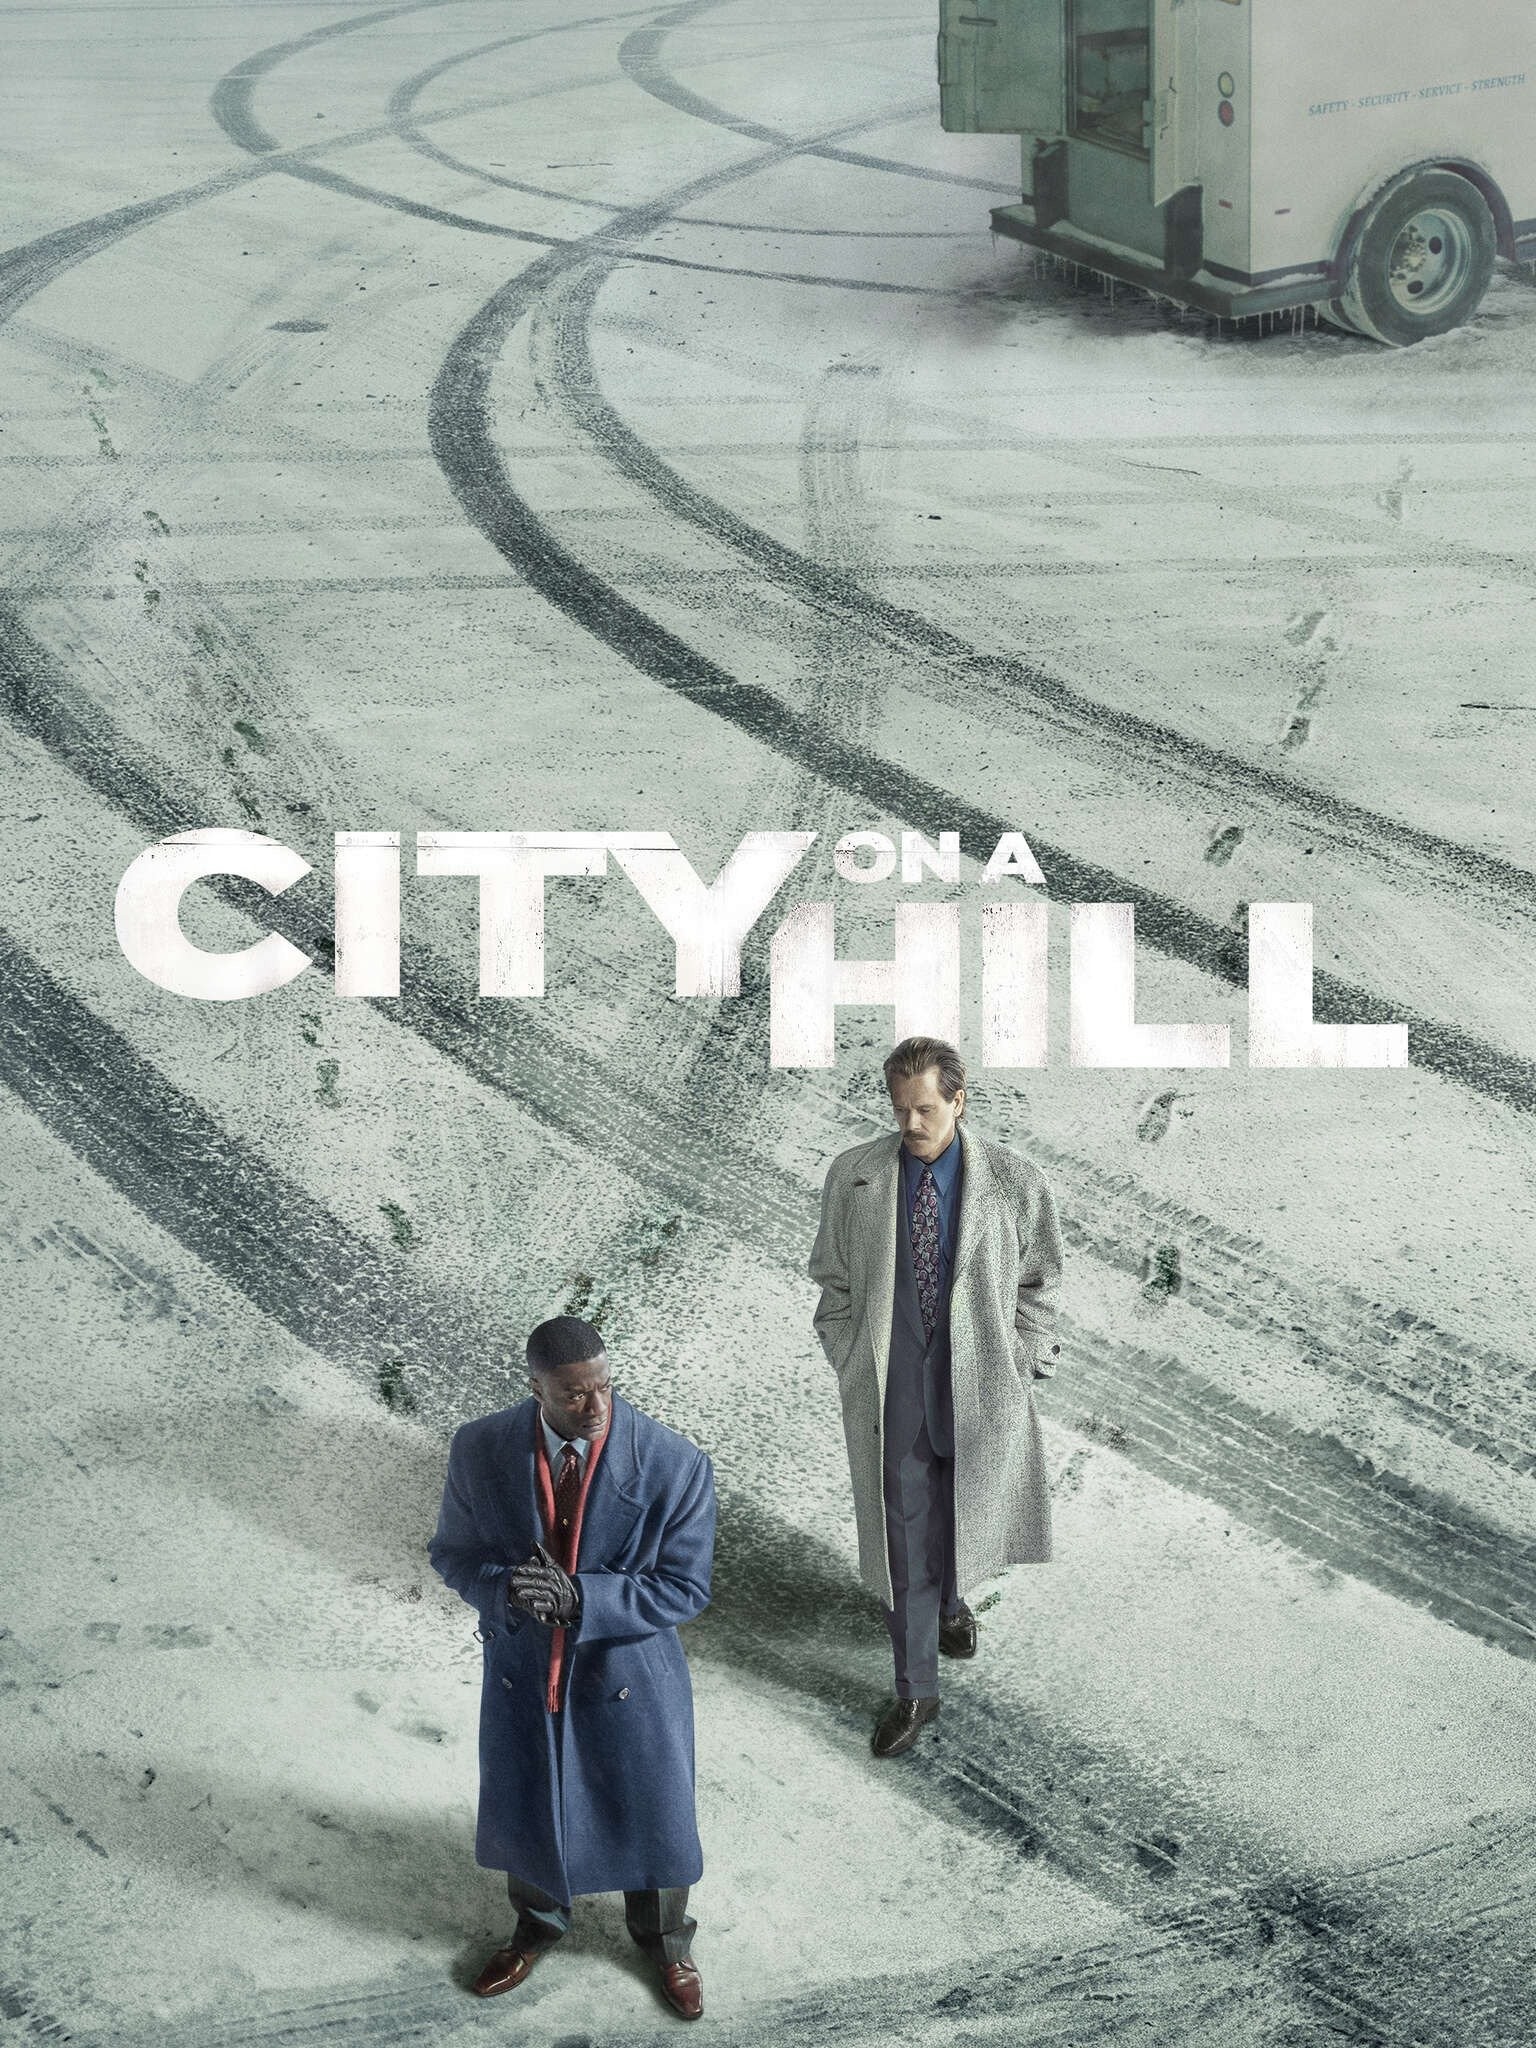 City on a Hill - Metacritic